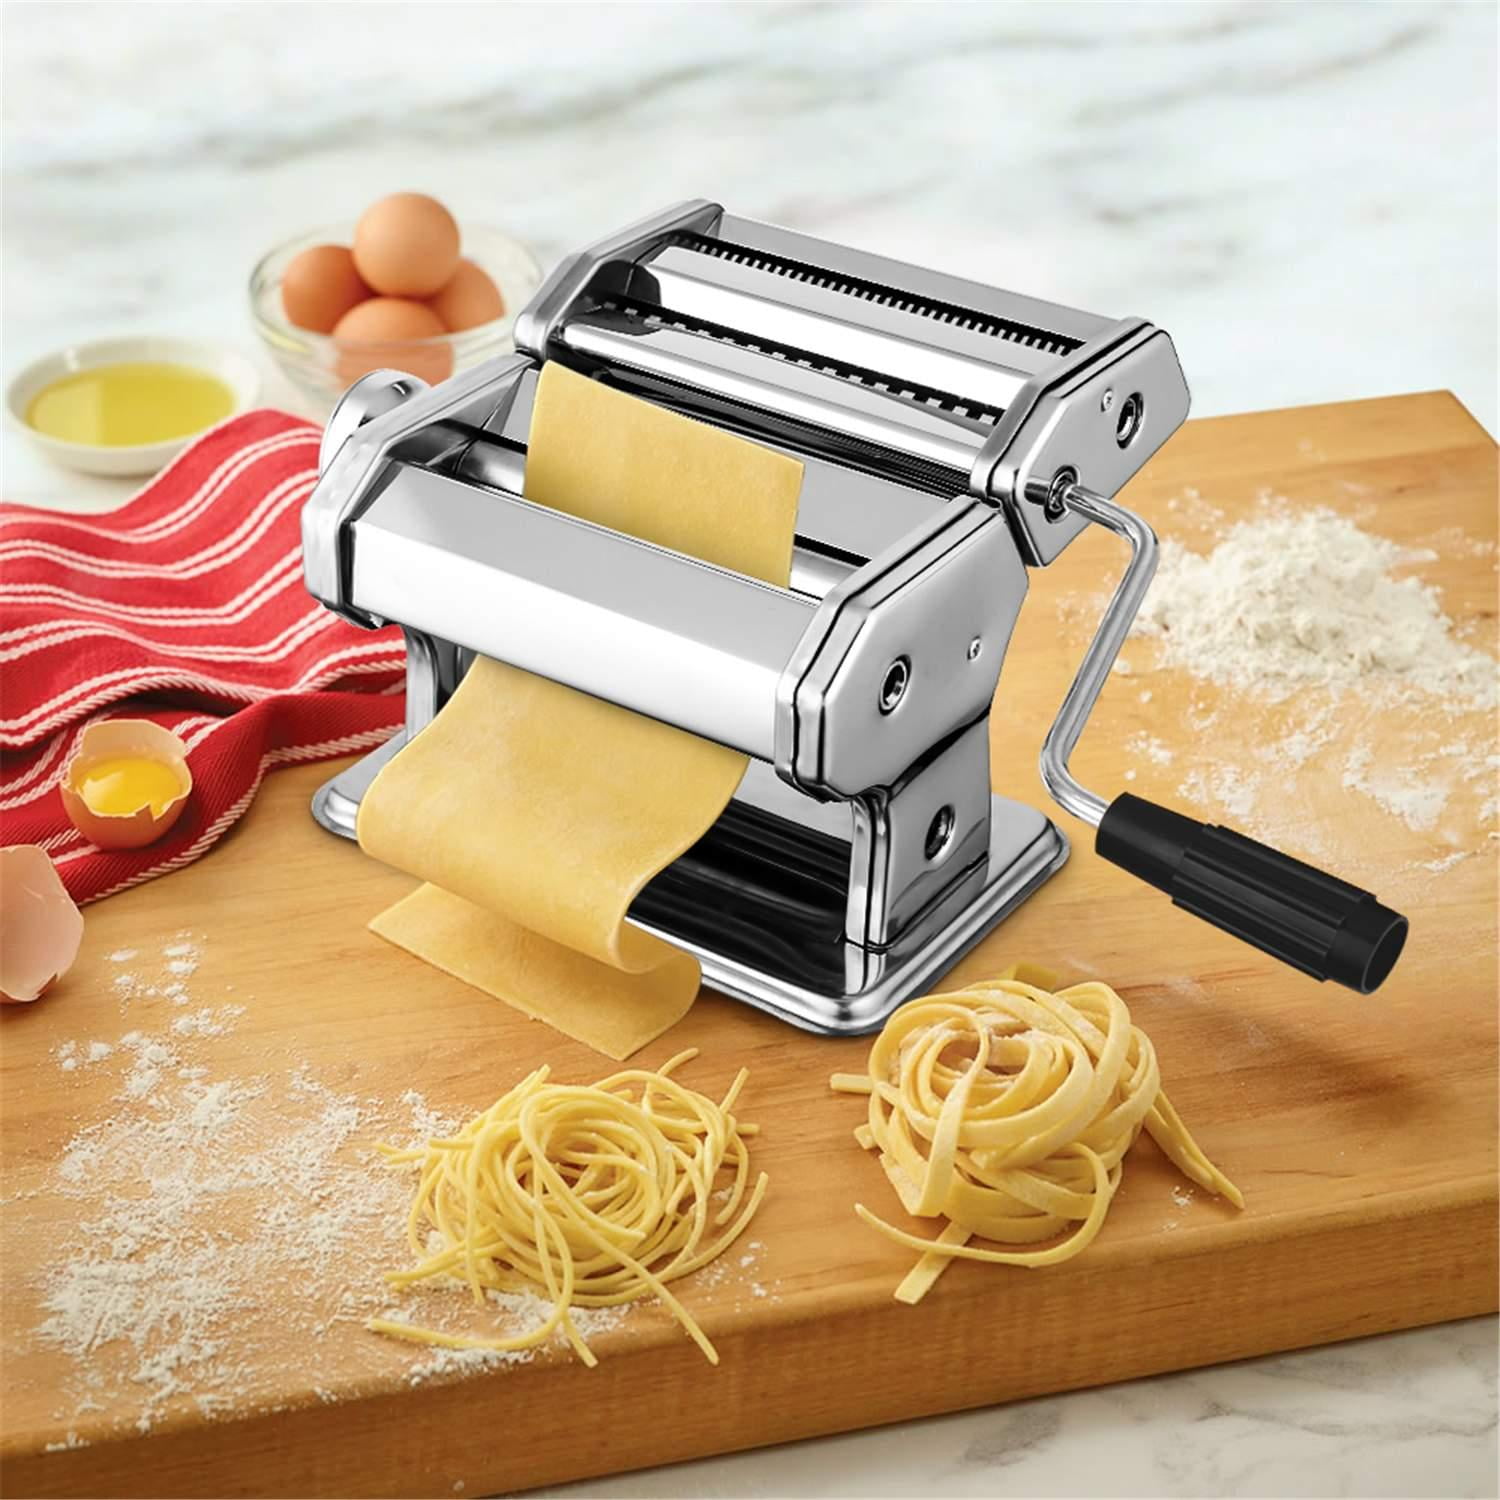 Stainless Steel Noodle Cutter Dough Roller Pasta Maker Machine Home Kitchen Tool